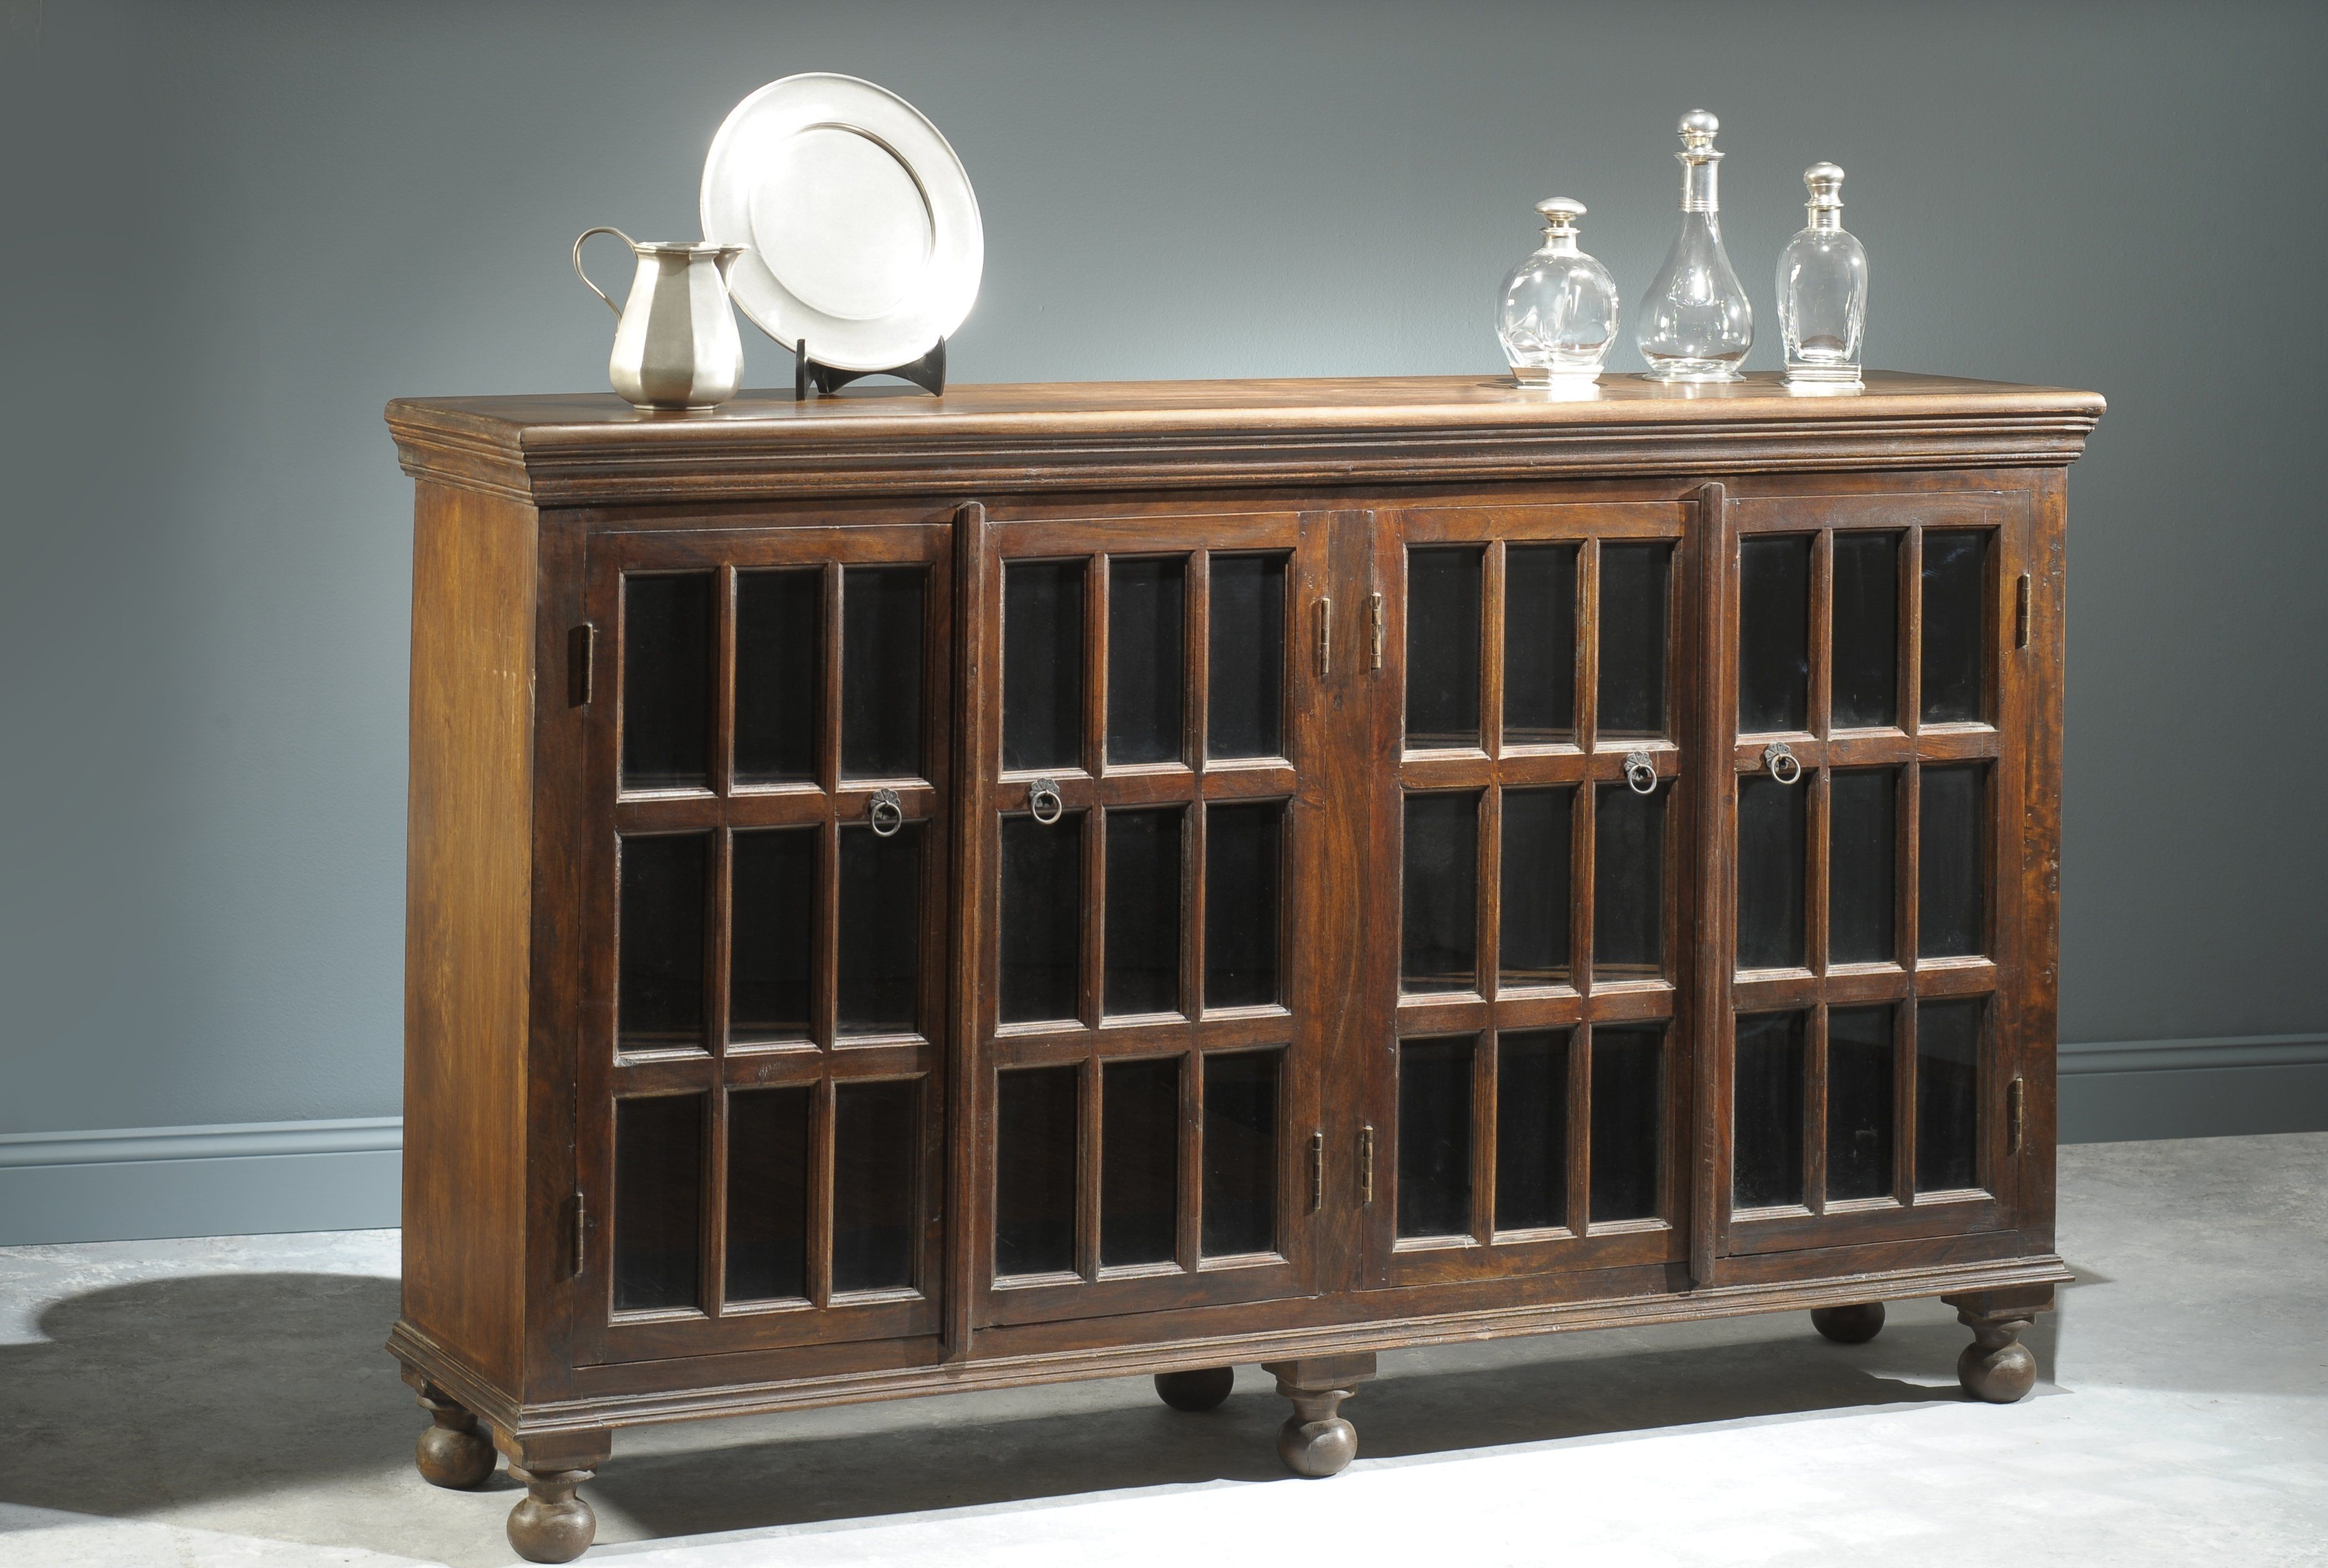 William Sheppee Portsmouth Sideboard | Wayfair Pertaining To Most Popular 2 Door/2 Drawer Cast Jali Sideboards (View 16 of 20)